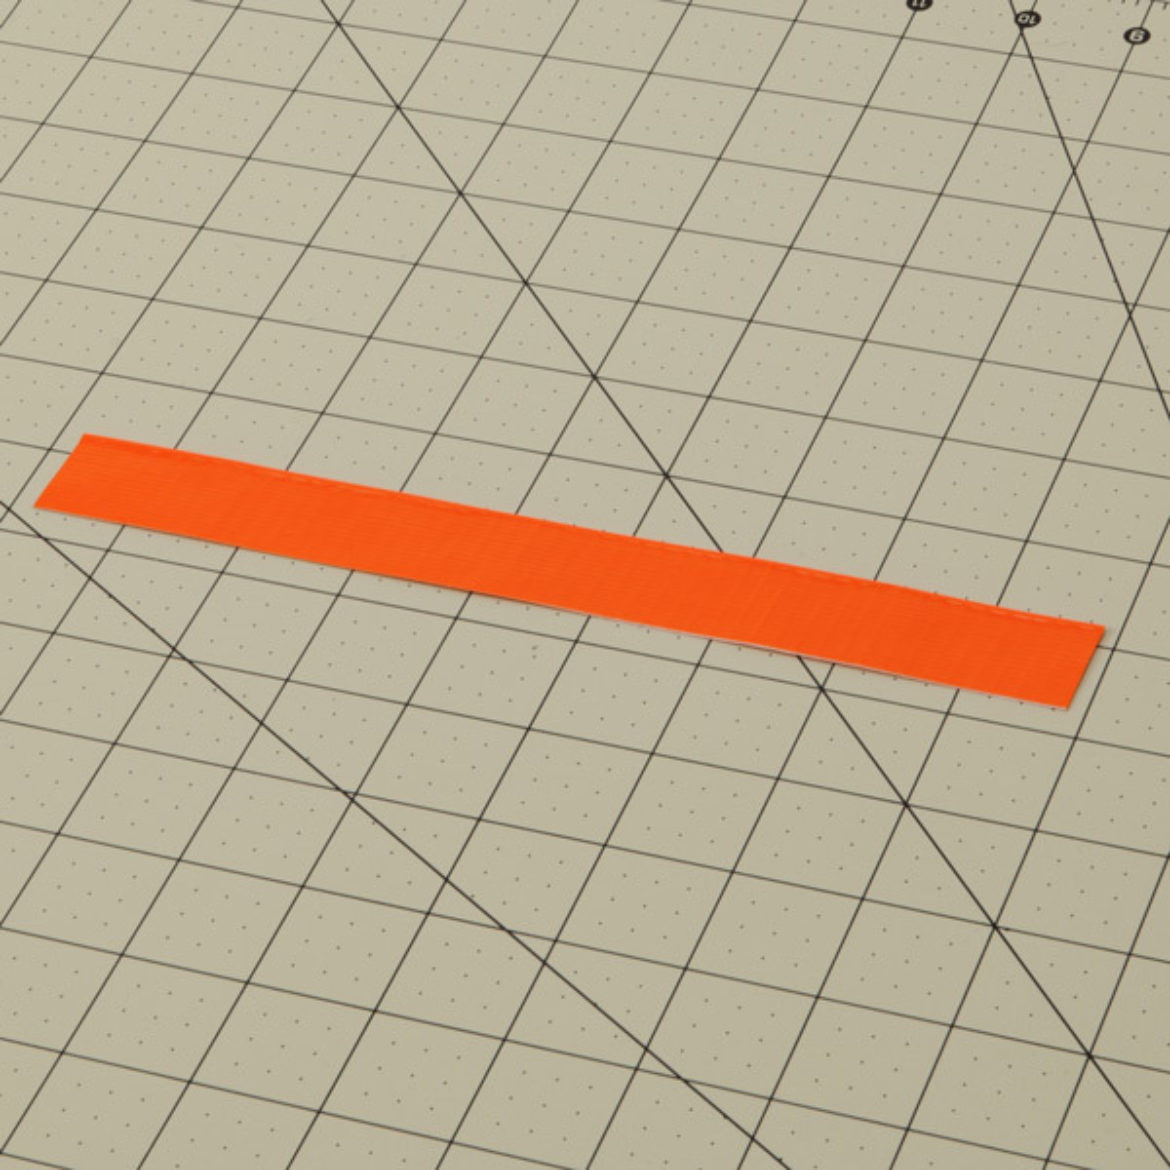 Strip of Orange Duck Tape filded length wise to create a double sided strip of Duck Tape